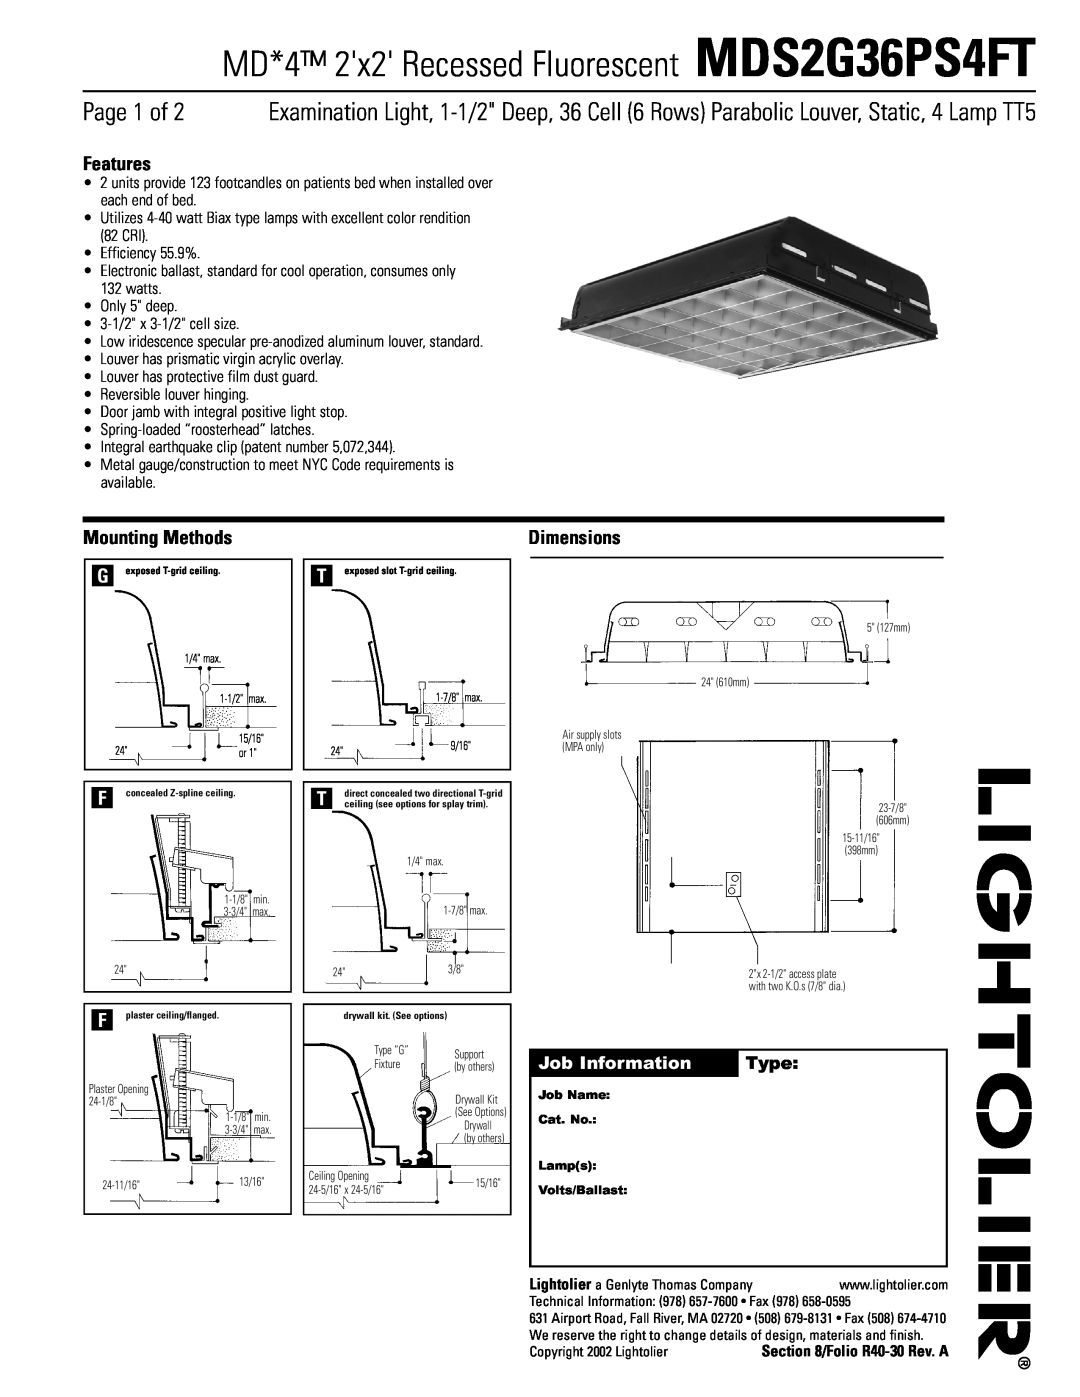 Lightolier dimensions MD*4 2x2 Recessed Fluorescent MDS2G36PS4FT, Page 1 of, Features, Mounting Methods, Dimensions 